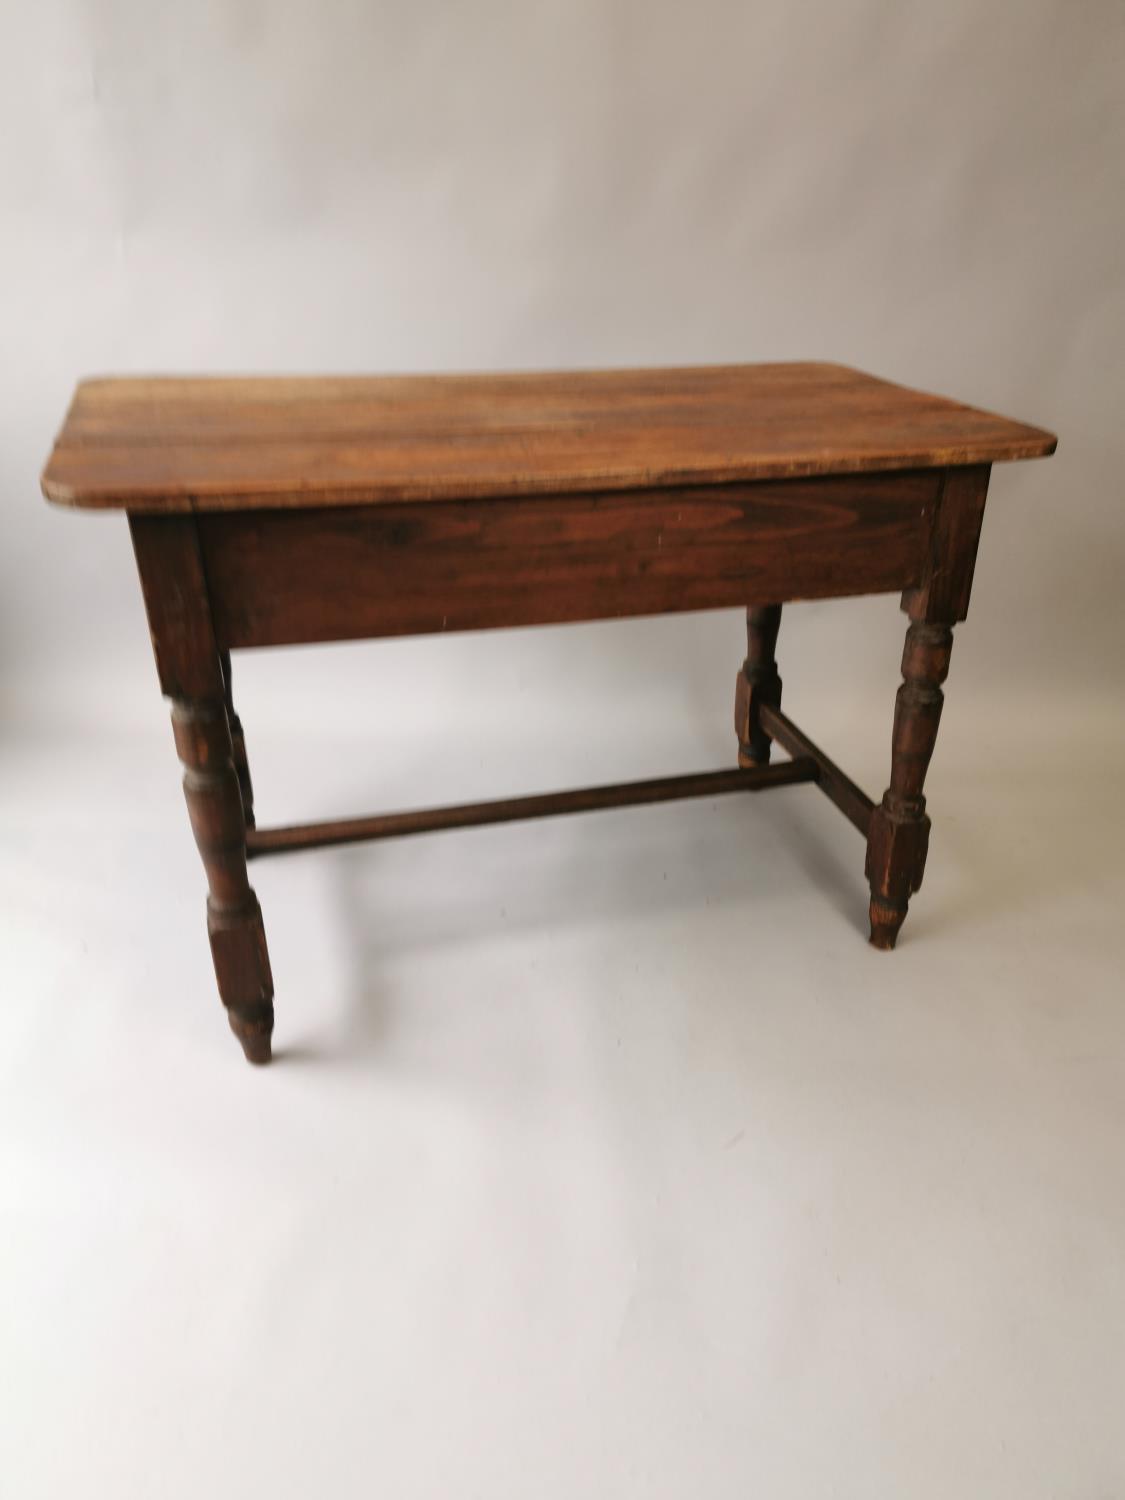 19th. C. painted pine table